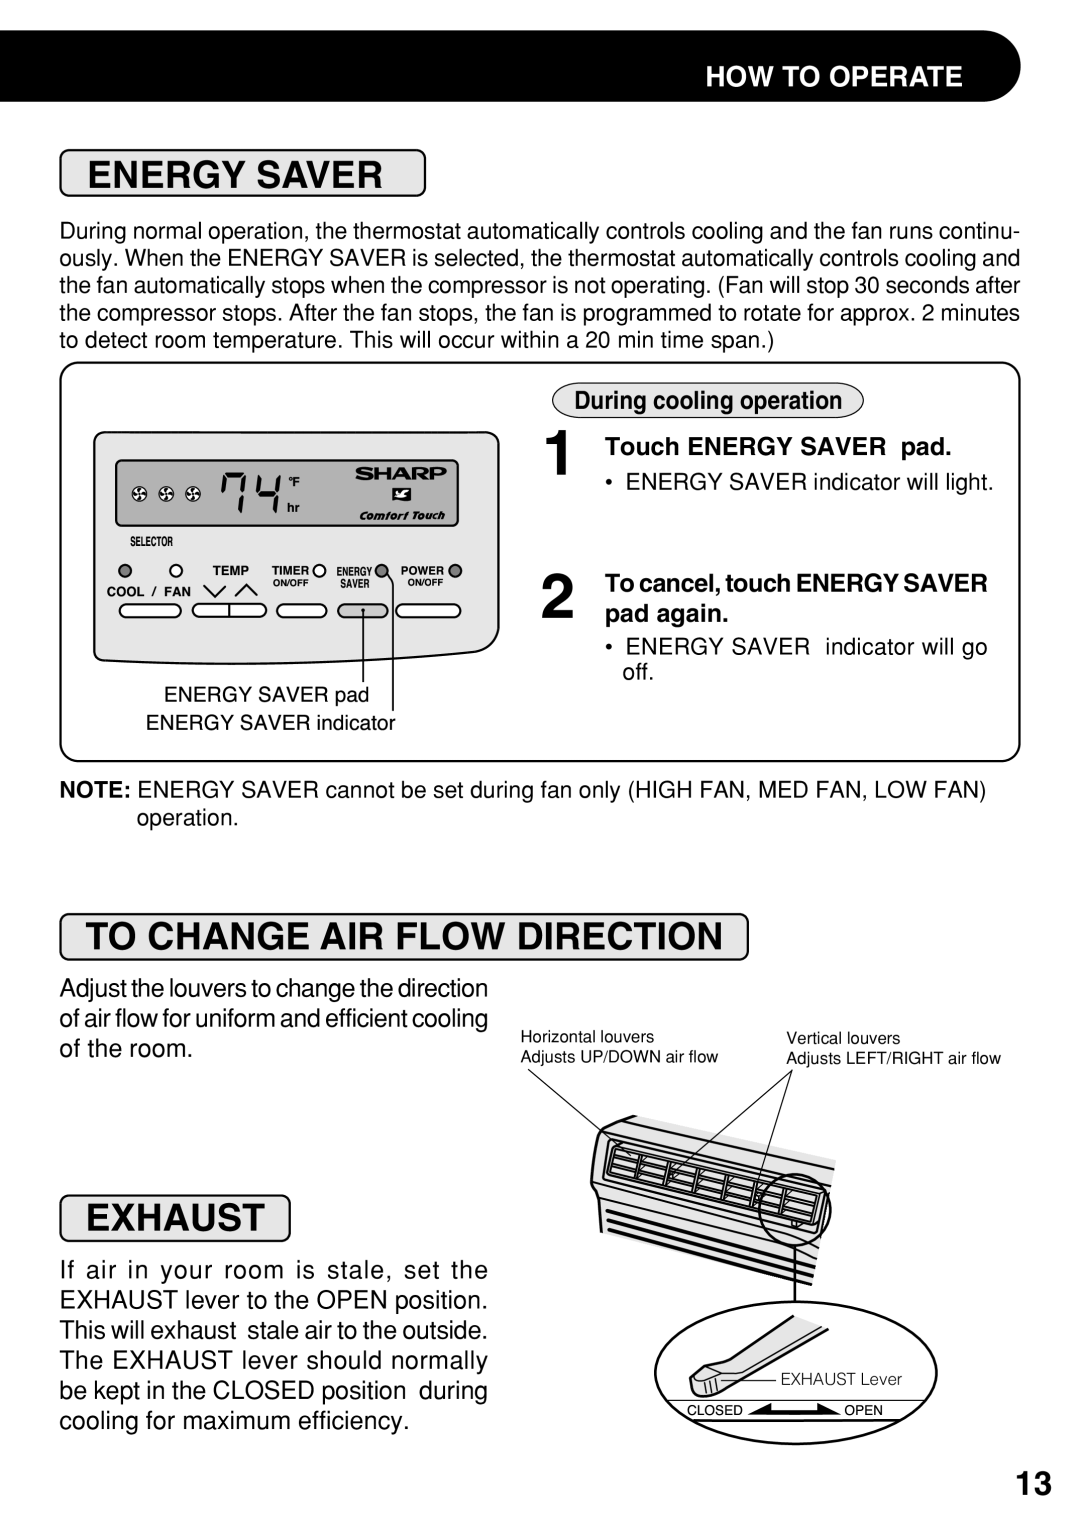 Sharp AF-100DX Energy Saver, To Change Air Flow Direction, Exhaust, Touch ENERGY SAVER pad, pad again, How To Operate 